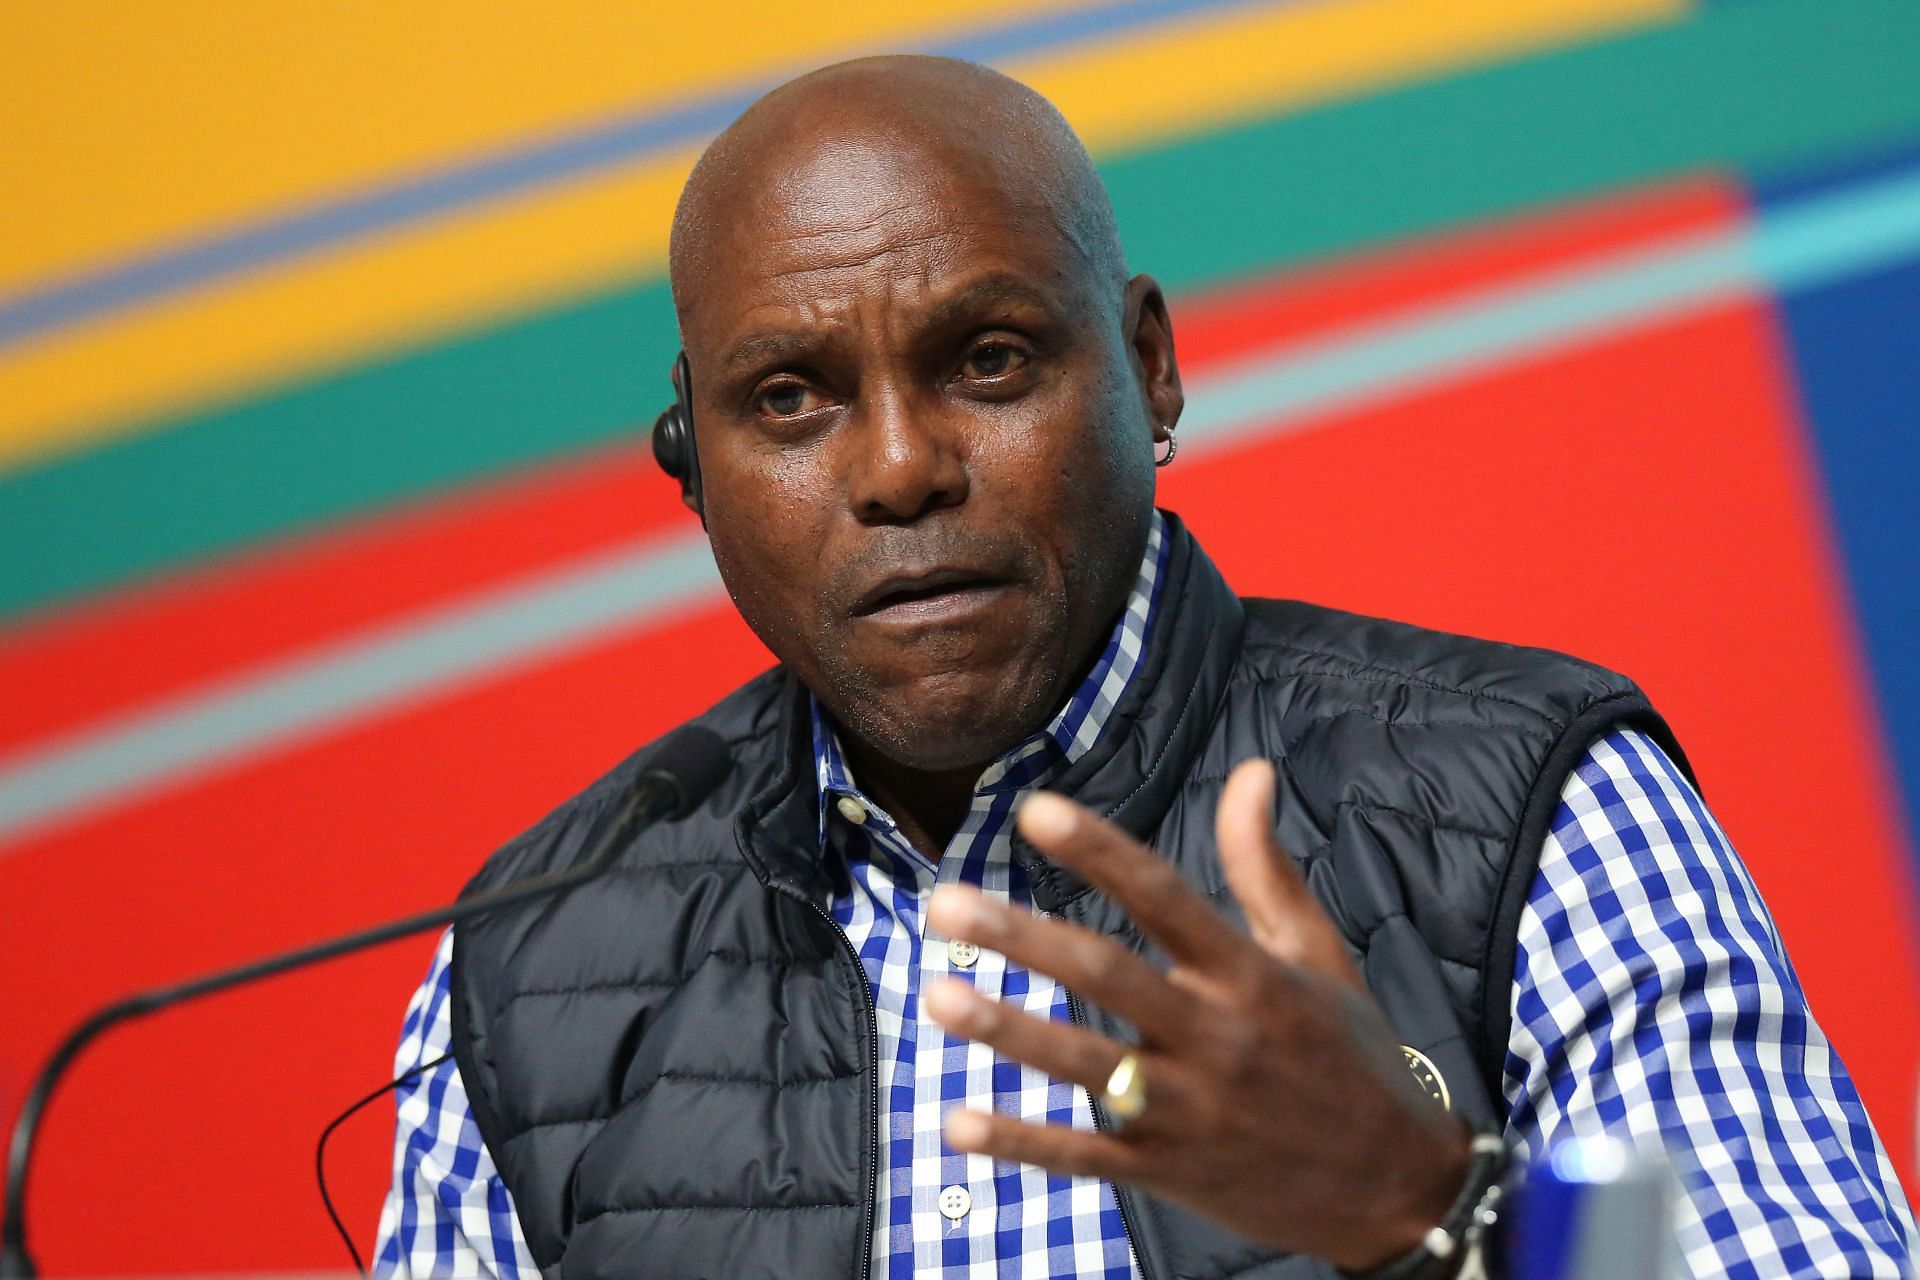 Carl Lewis talks during a press conference at the 2023 Pan Am Games in Santiago, Chile.